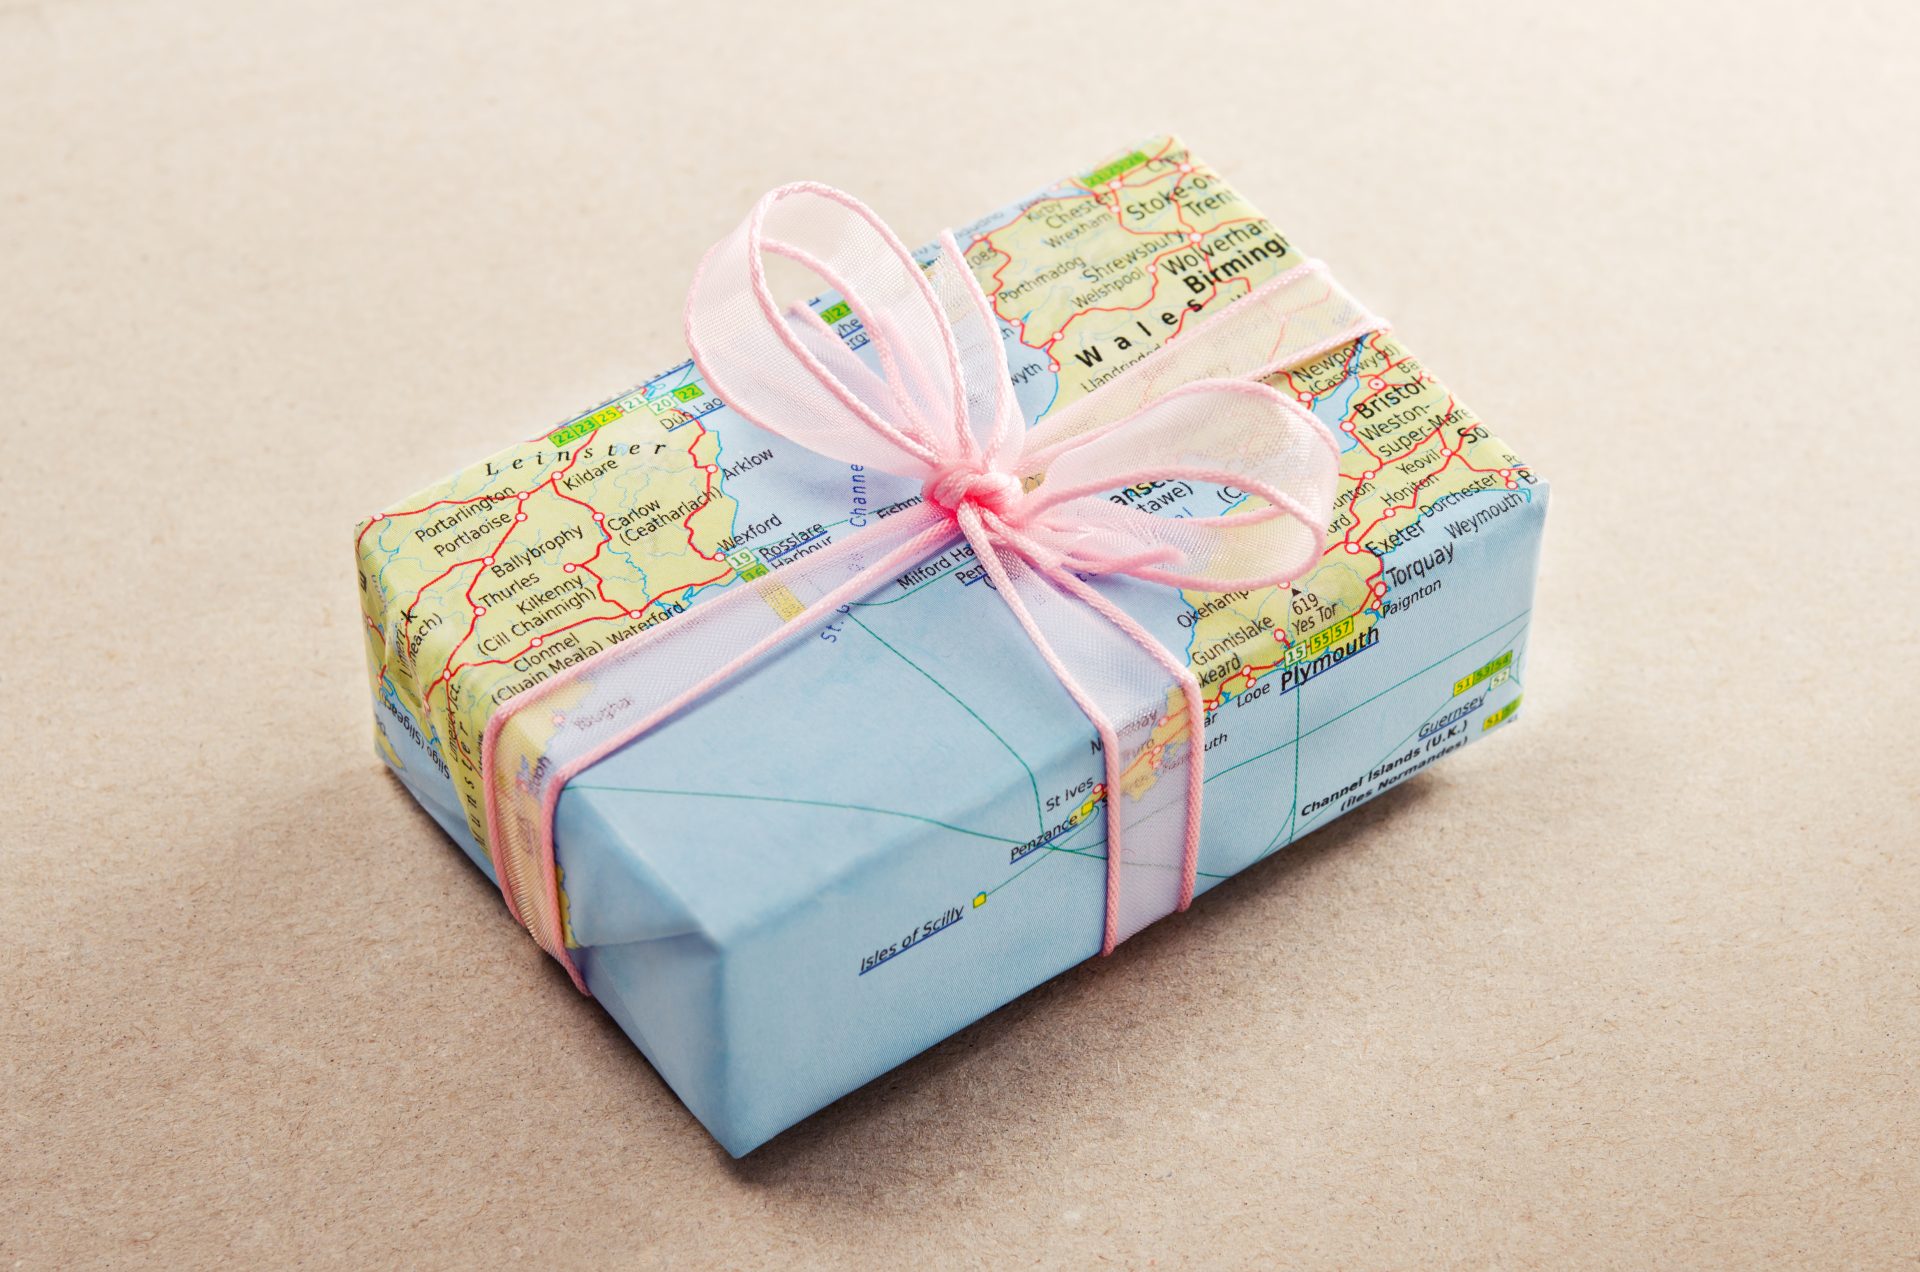 Gift wrapped in a map